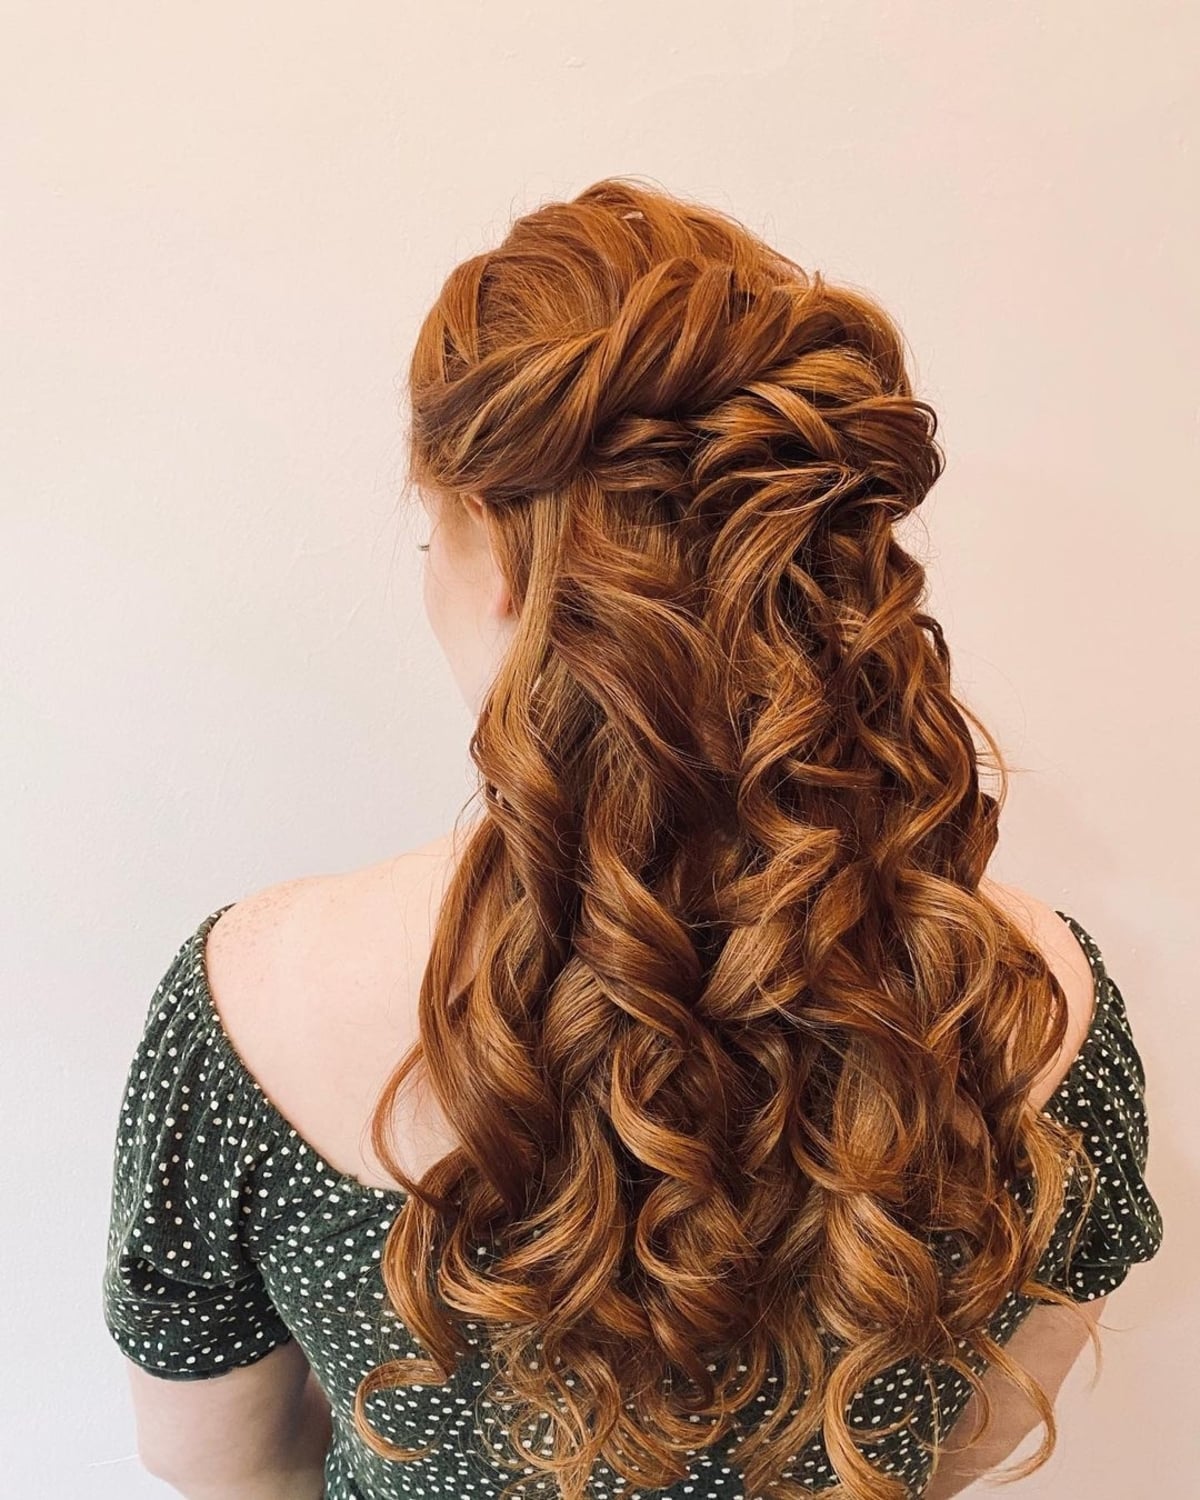 Grab Your Hair Wand: 35 Curled Hairstyles to Try